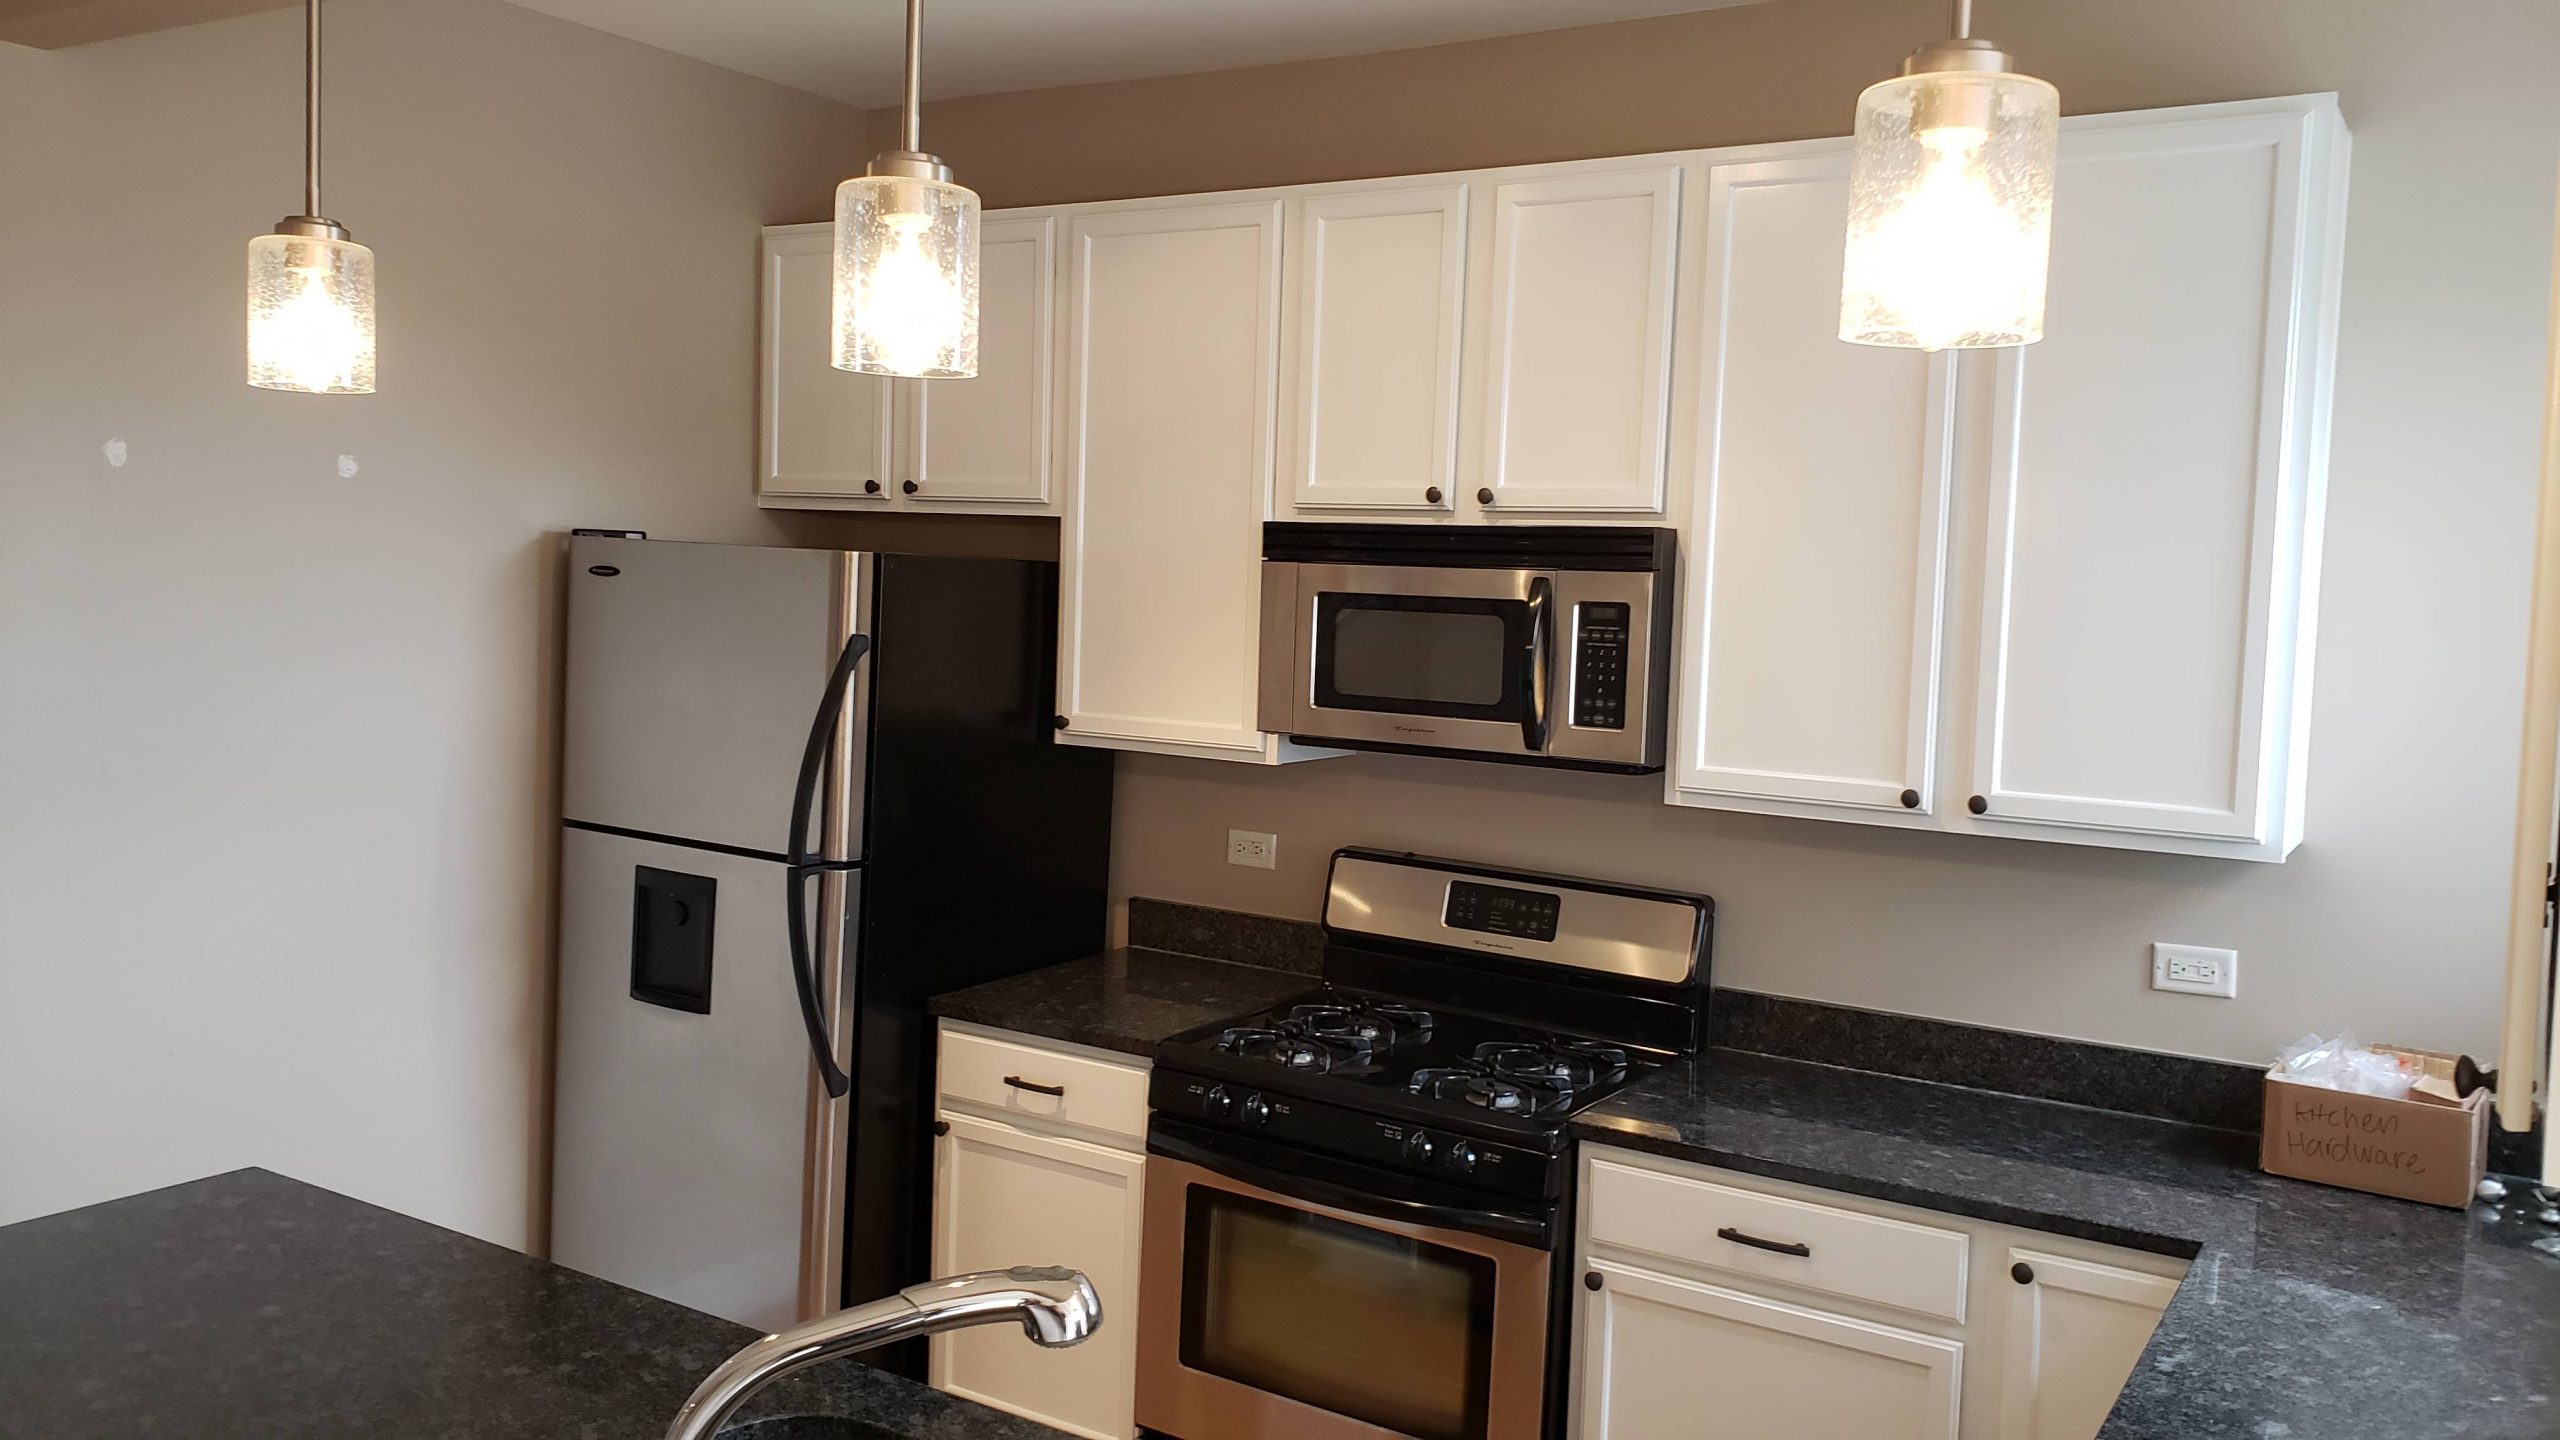 2020.04.22_Lakeview_Kitchen_cabinets_painting - Chicago-painter.-Kitchen-cabinets-painting.-Lakeview-5.jpg